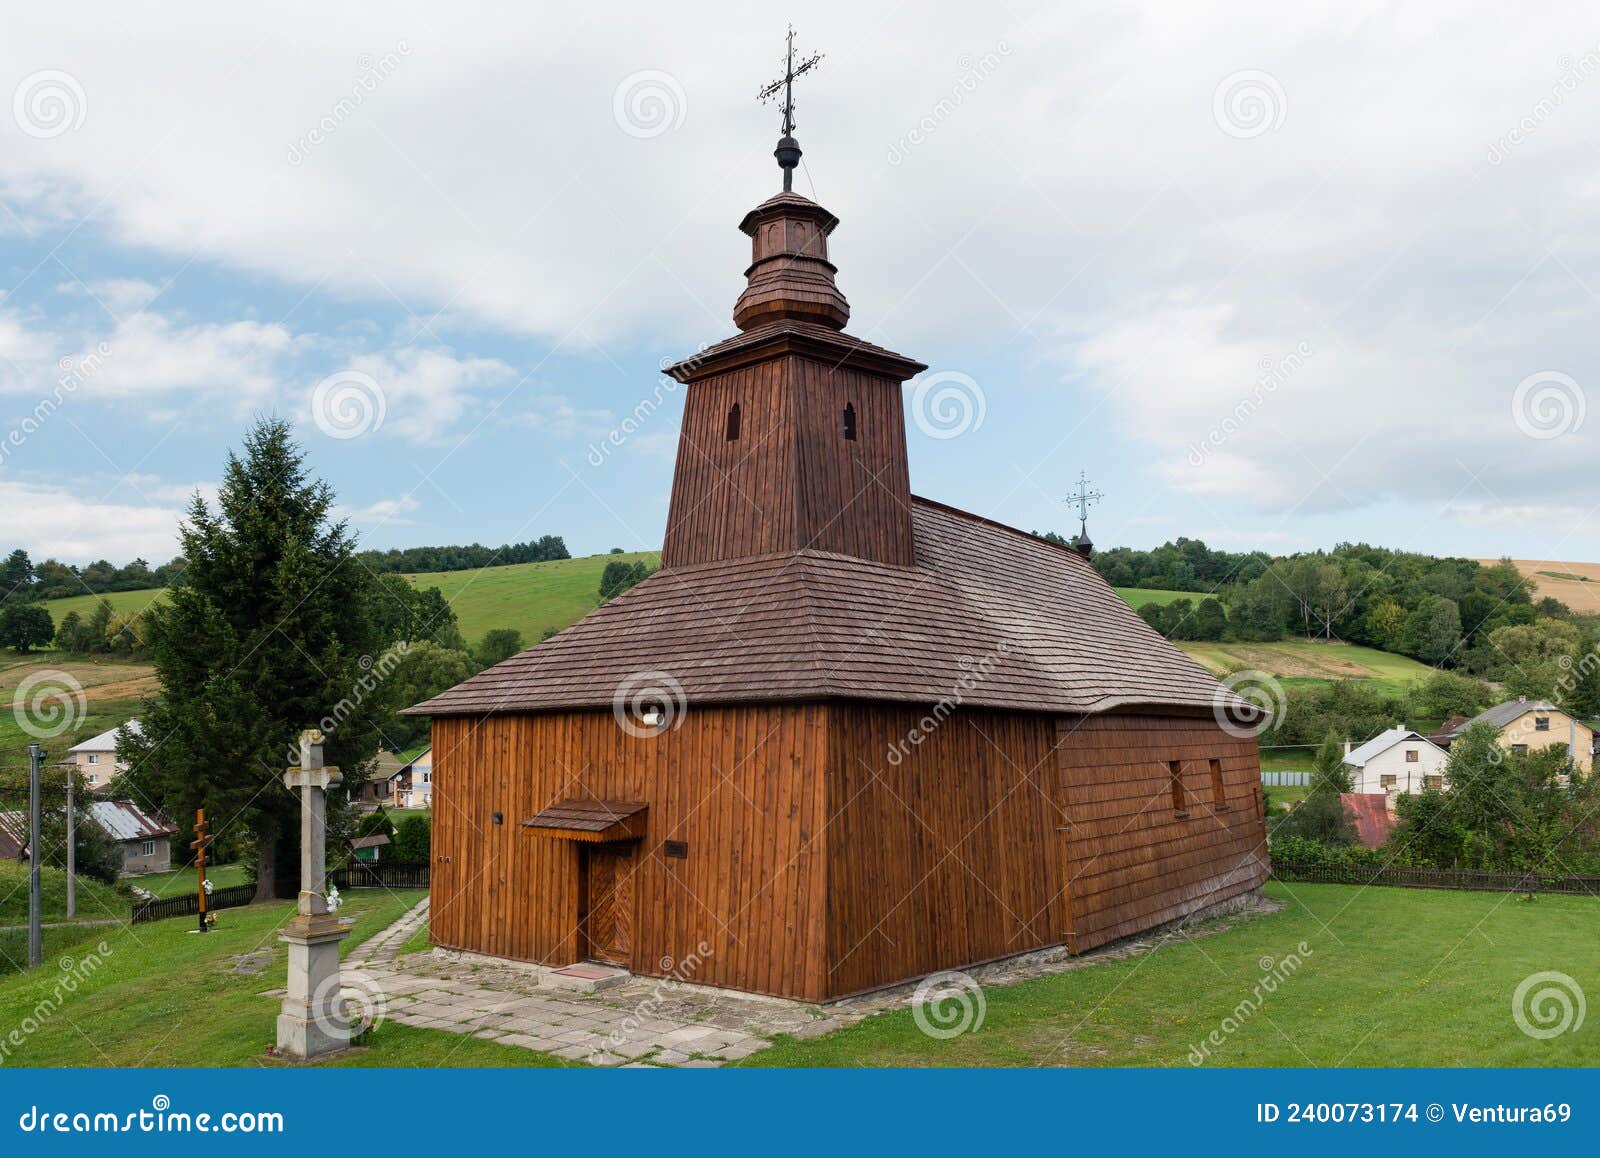 wooden church of st lucas the evangelist in a village krive, slovakia